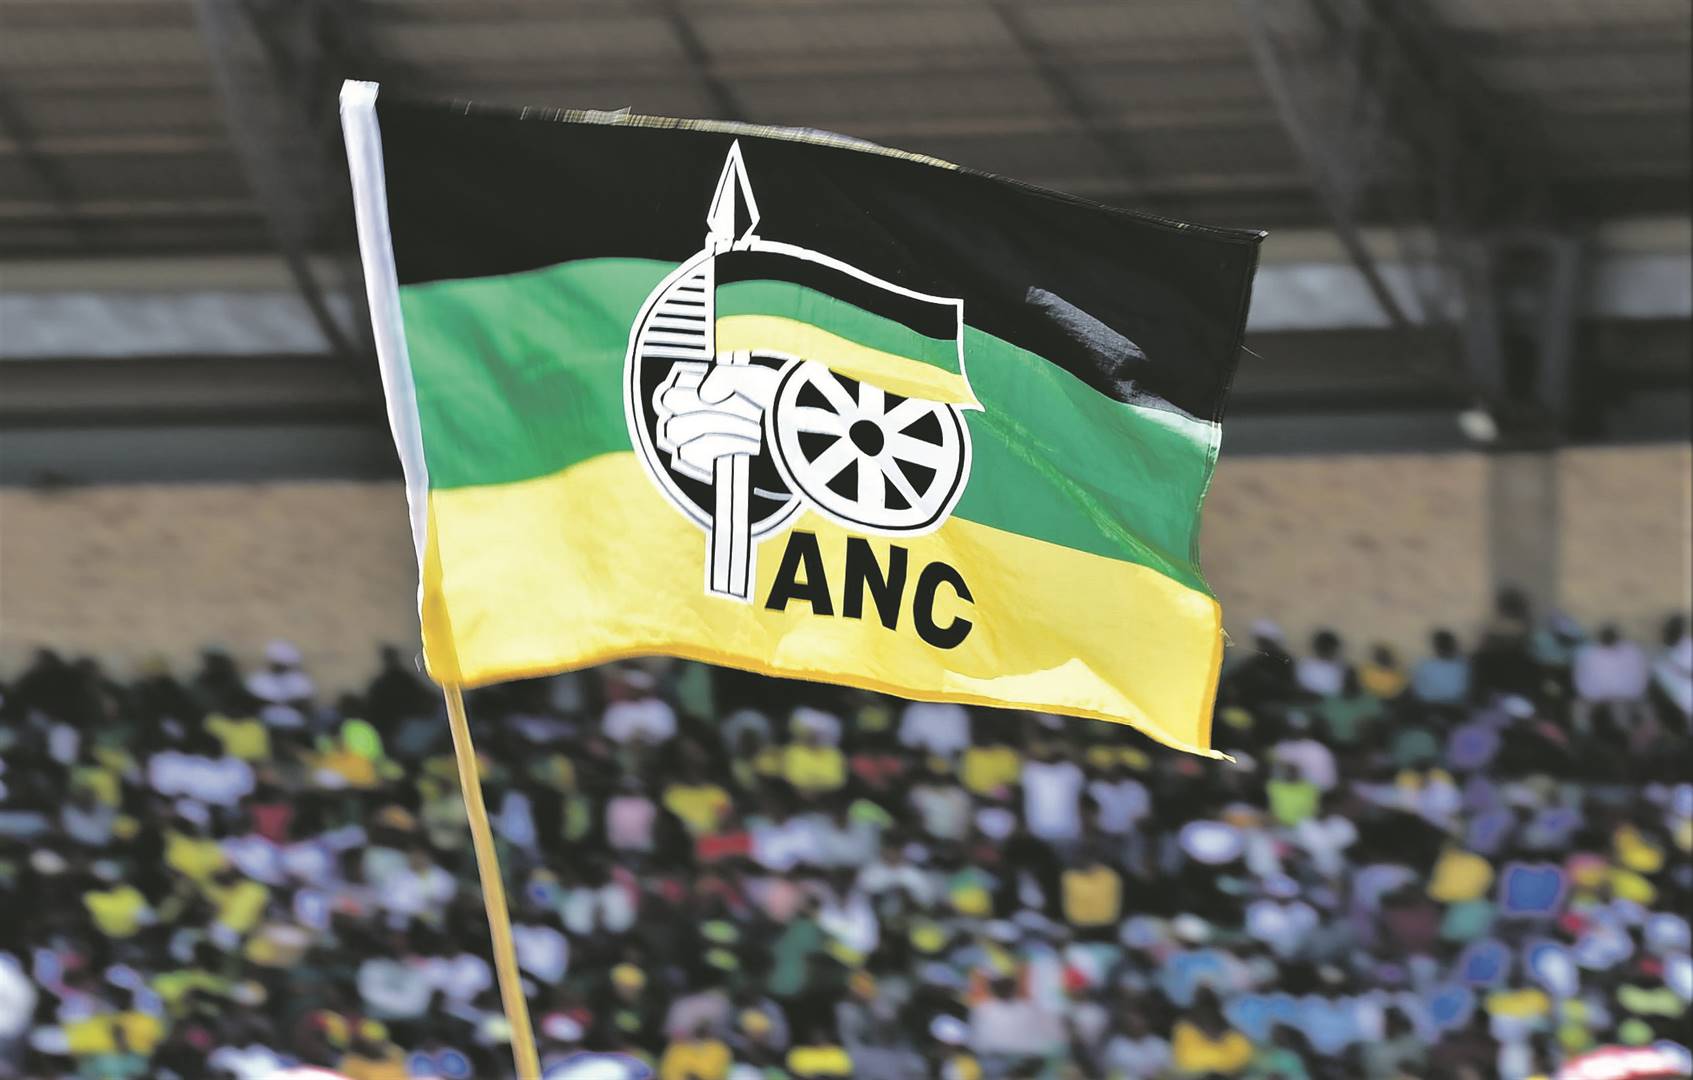 for every success the ANC can claim to have recorded in the nearly three decades that it has been in government, co-exists alongside evidence of unravelling, writes the author.